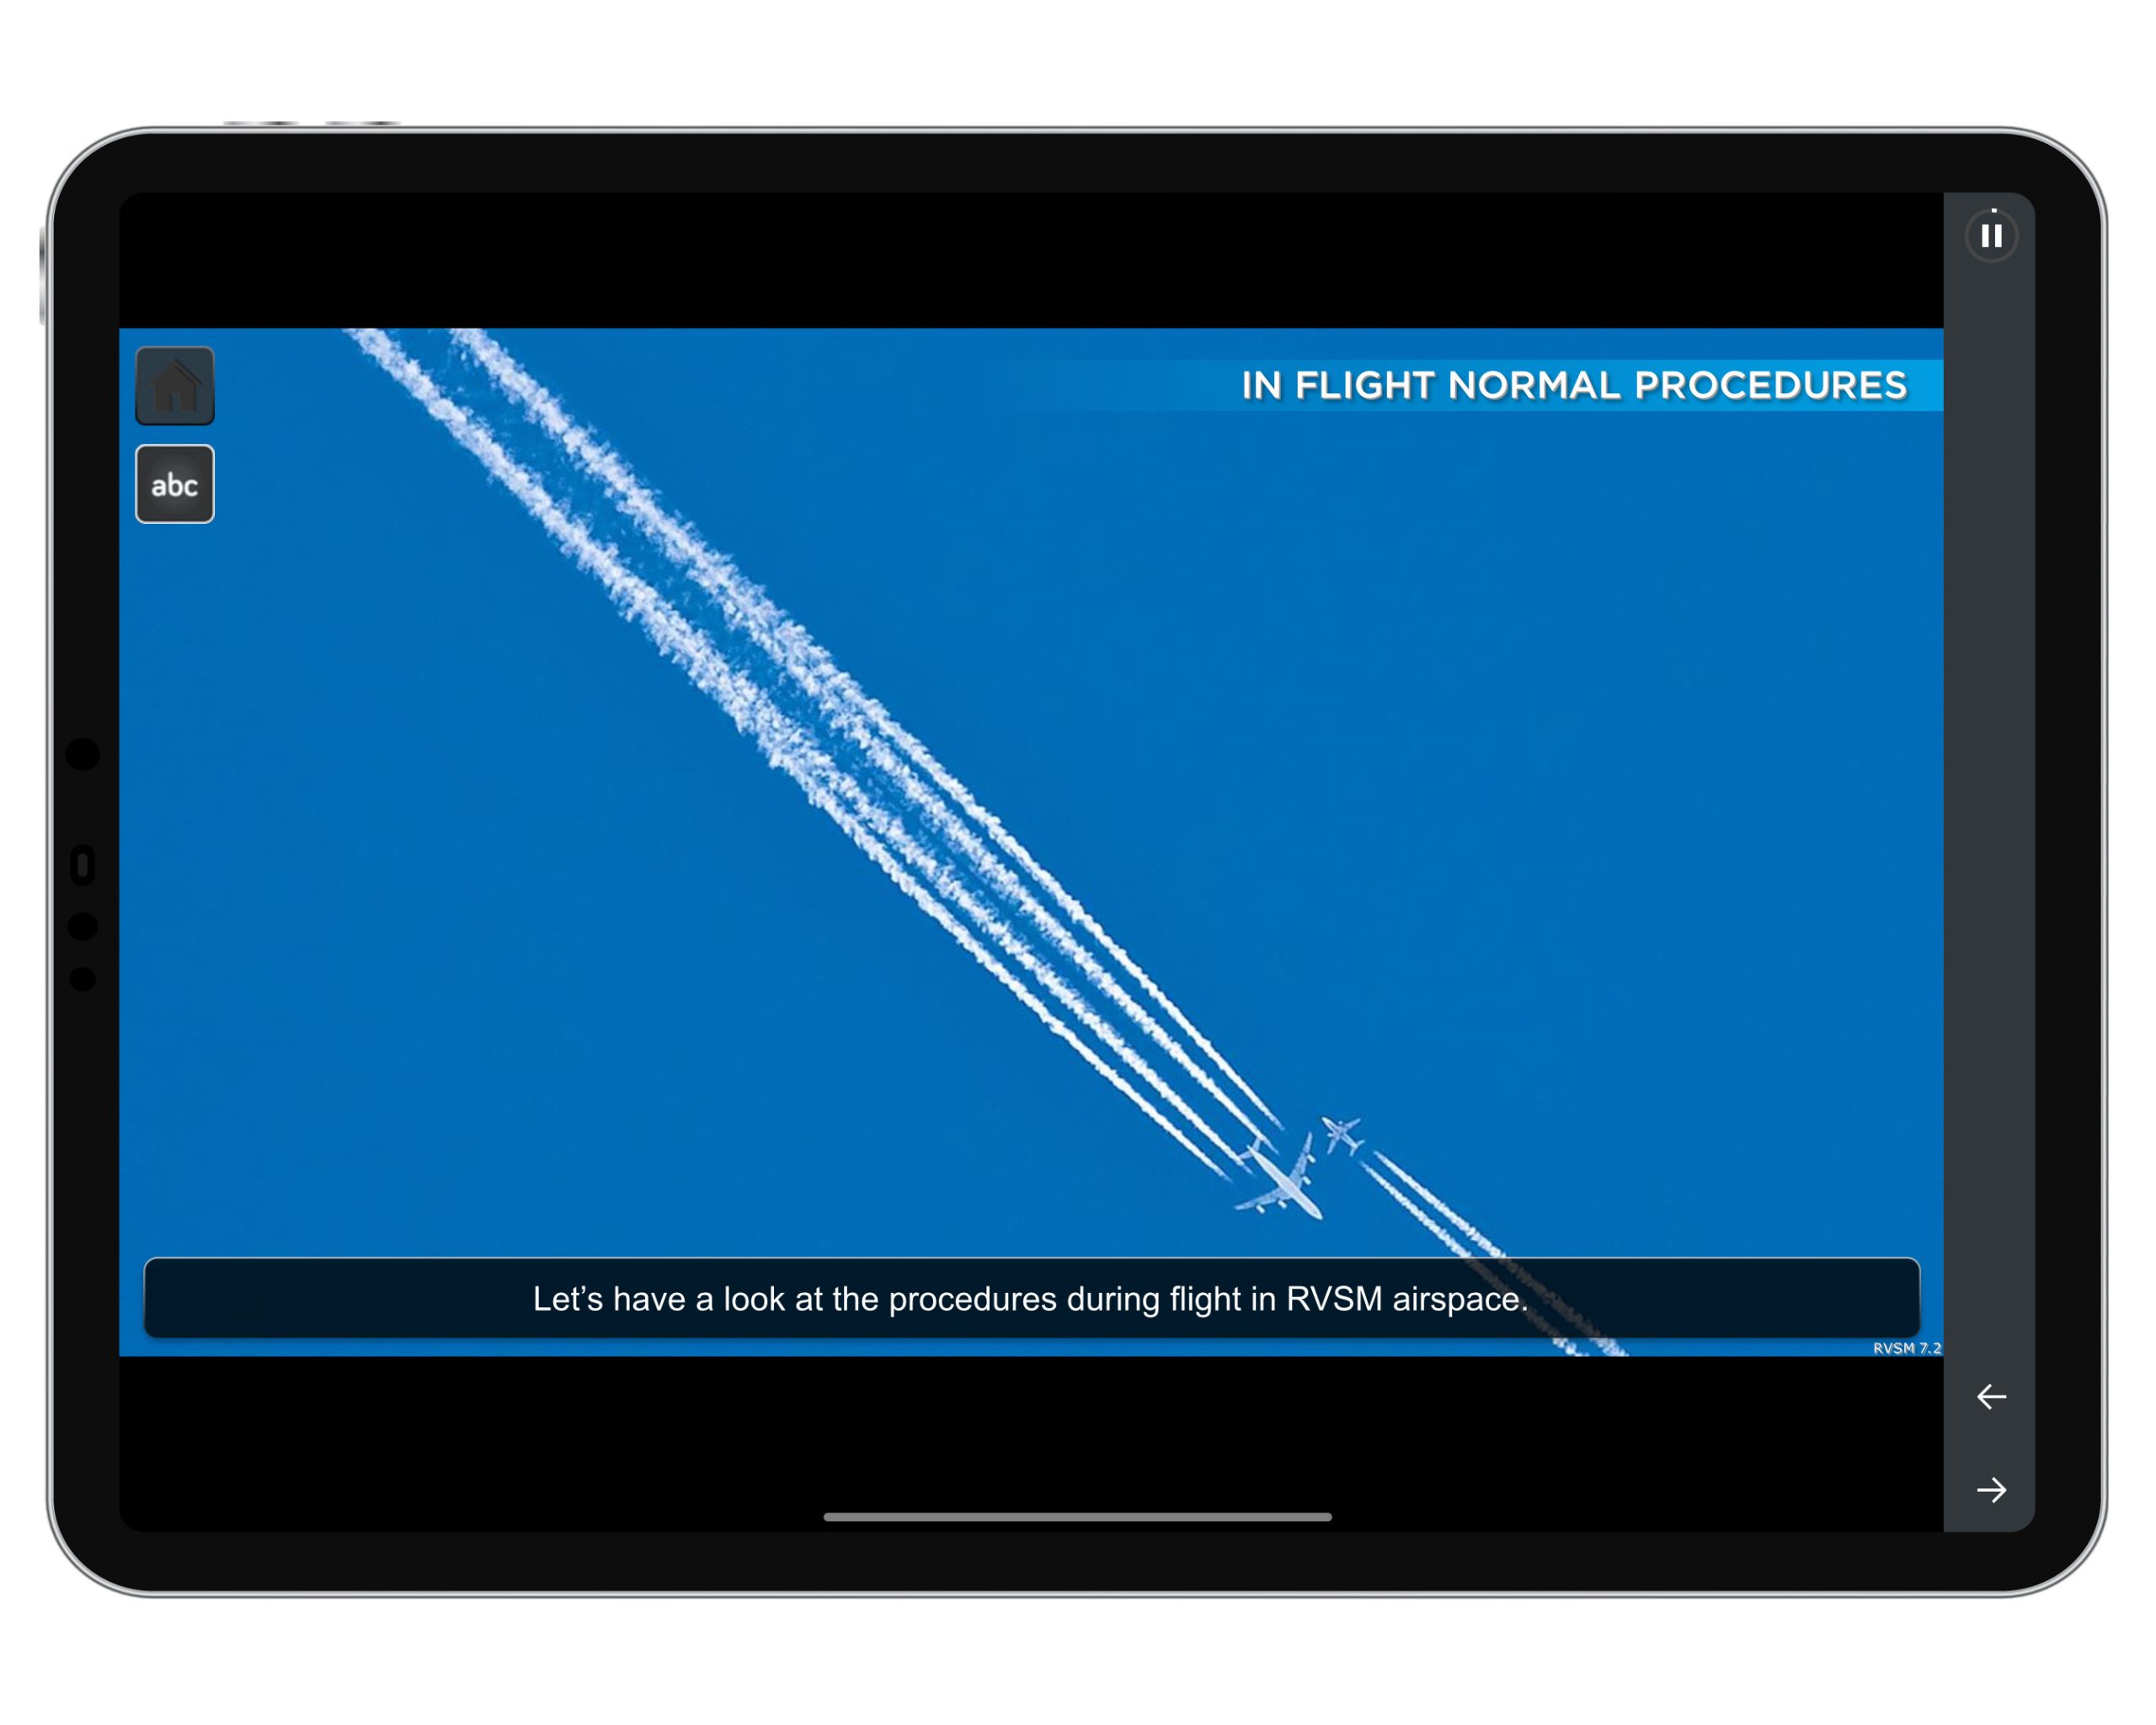 Screenshot showing Reduced Vertical Separation Minima course for the airline flight crew and flight instructors.